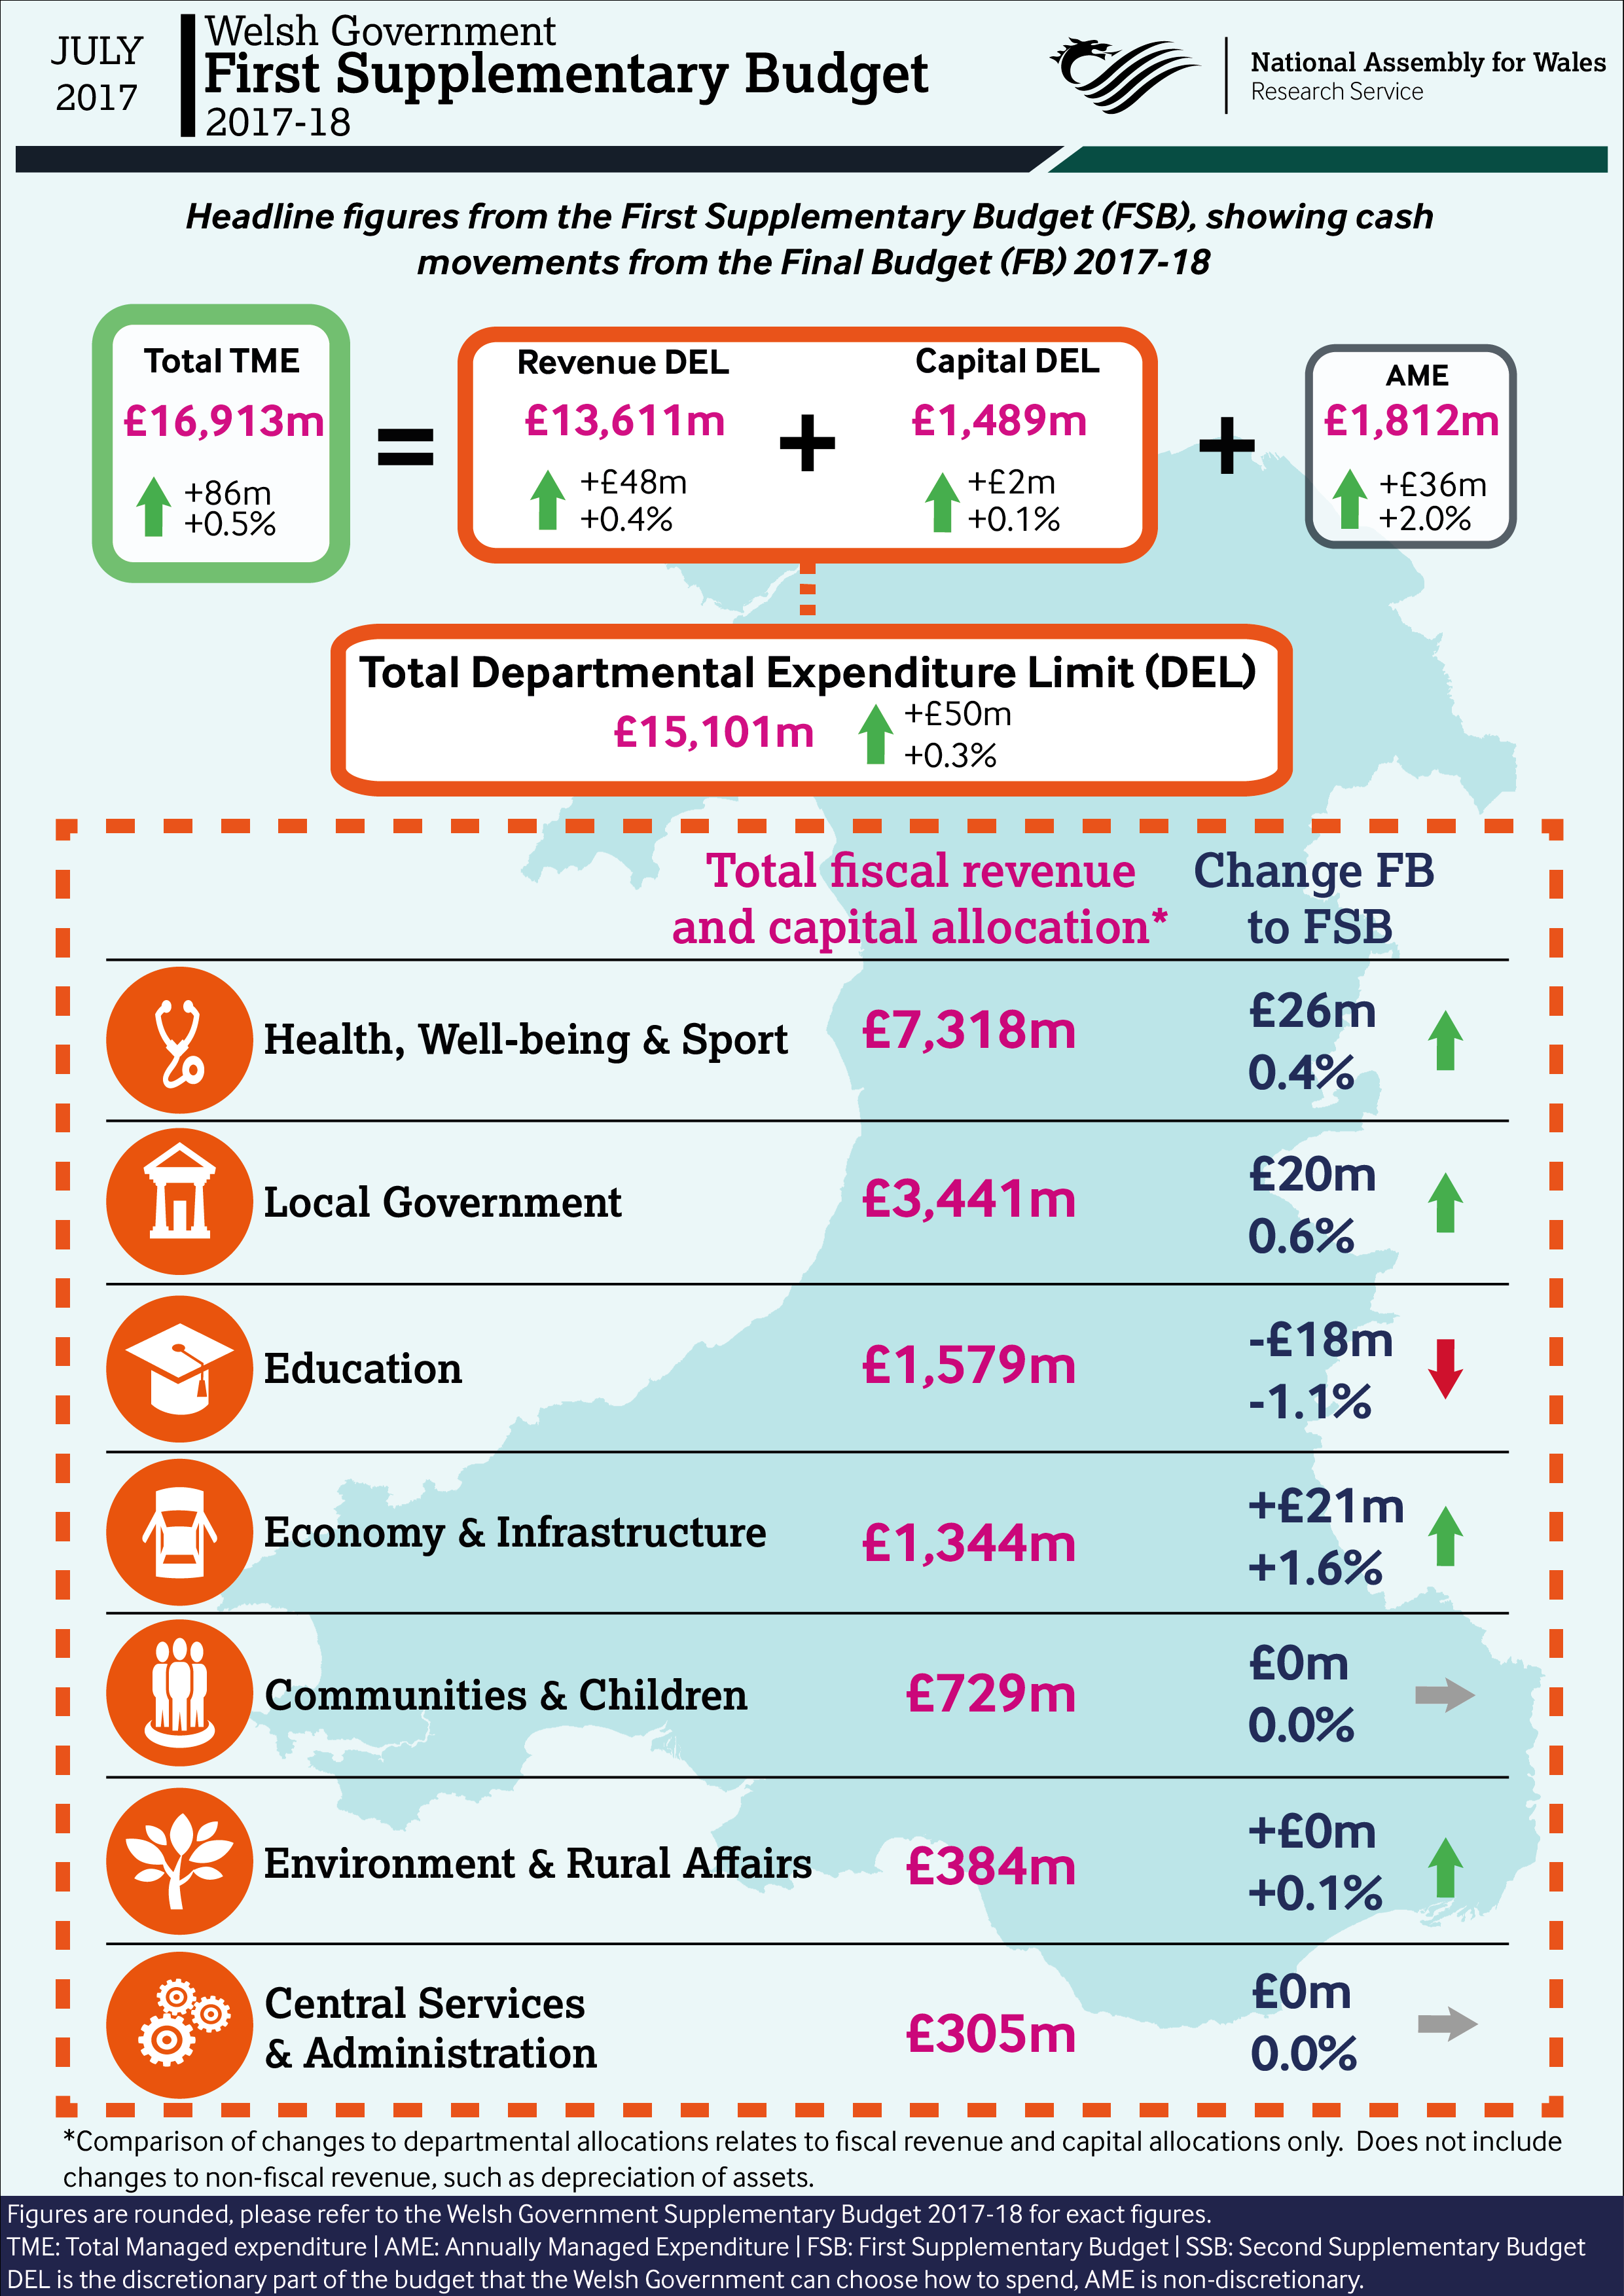 Infographic showing headlines from the Welsh Government’s First Supplementary Budget 2017-18